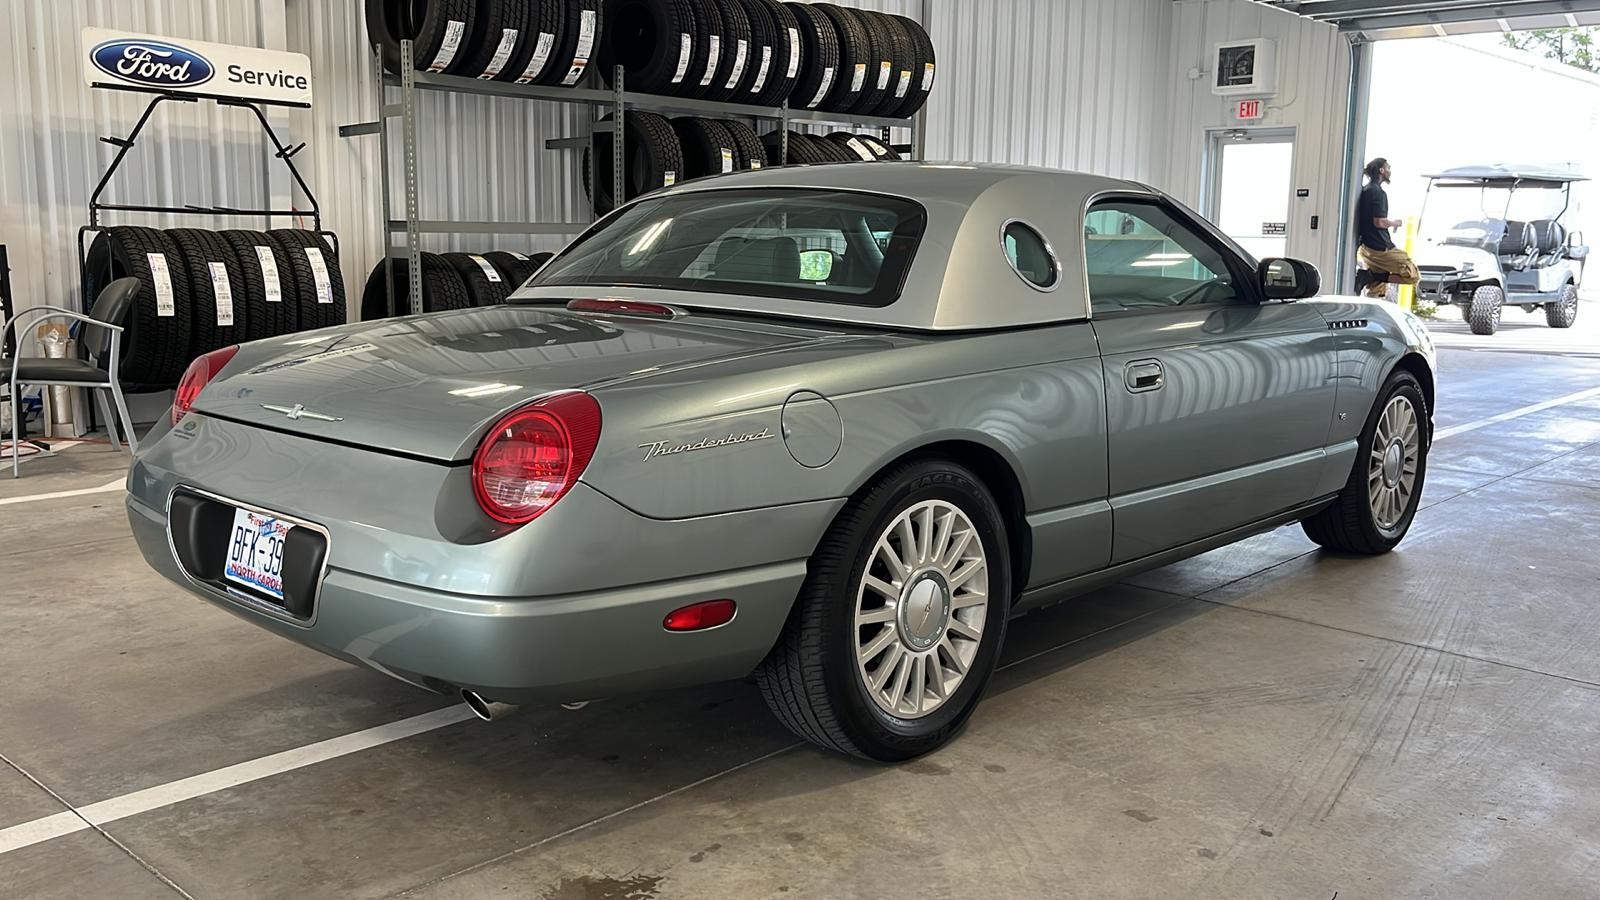 2004 Ford Thunderbird Pacific Coast Roadster 23